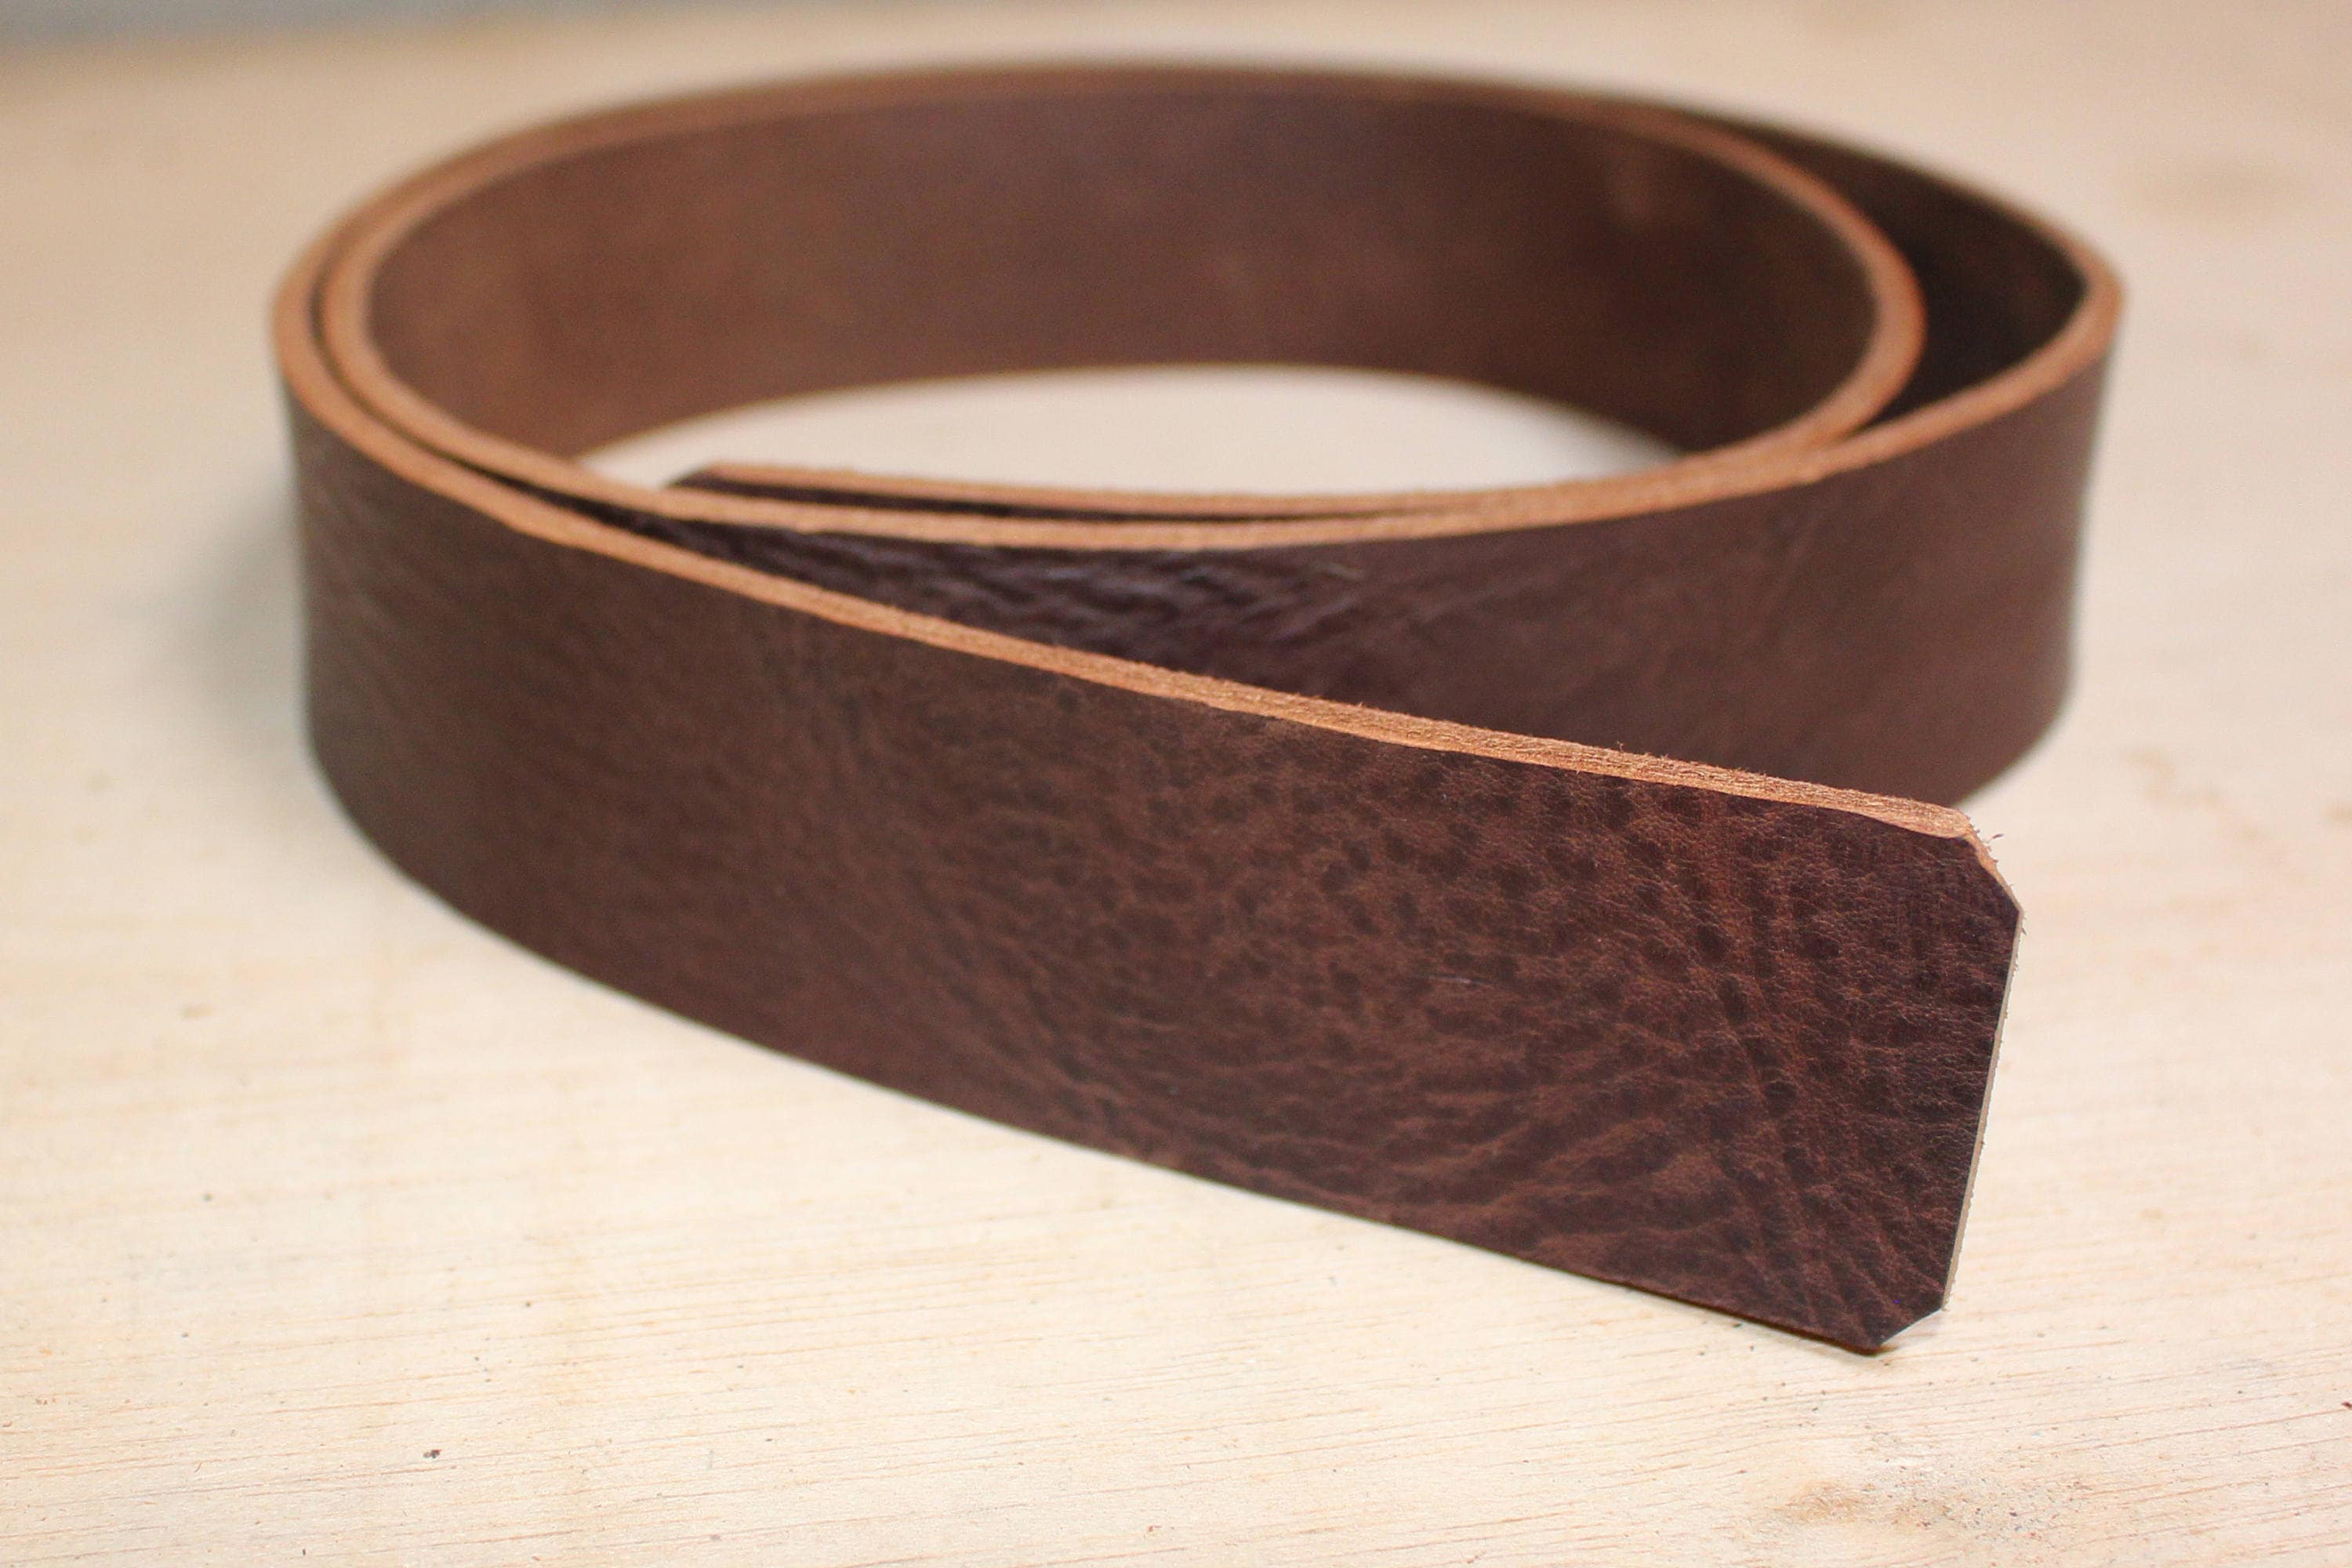 Leather Straps for Leather Crafts